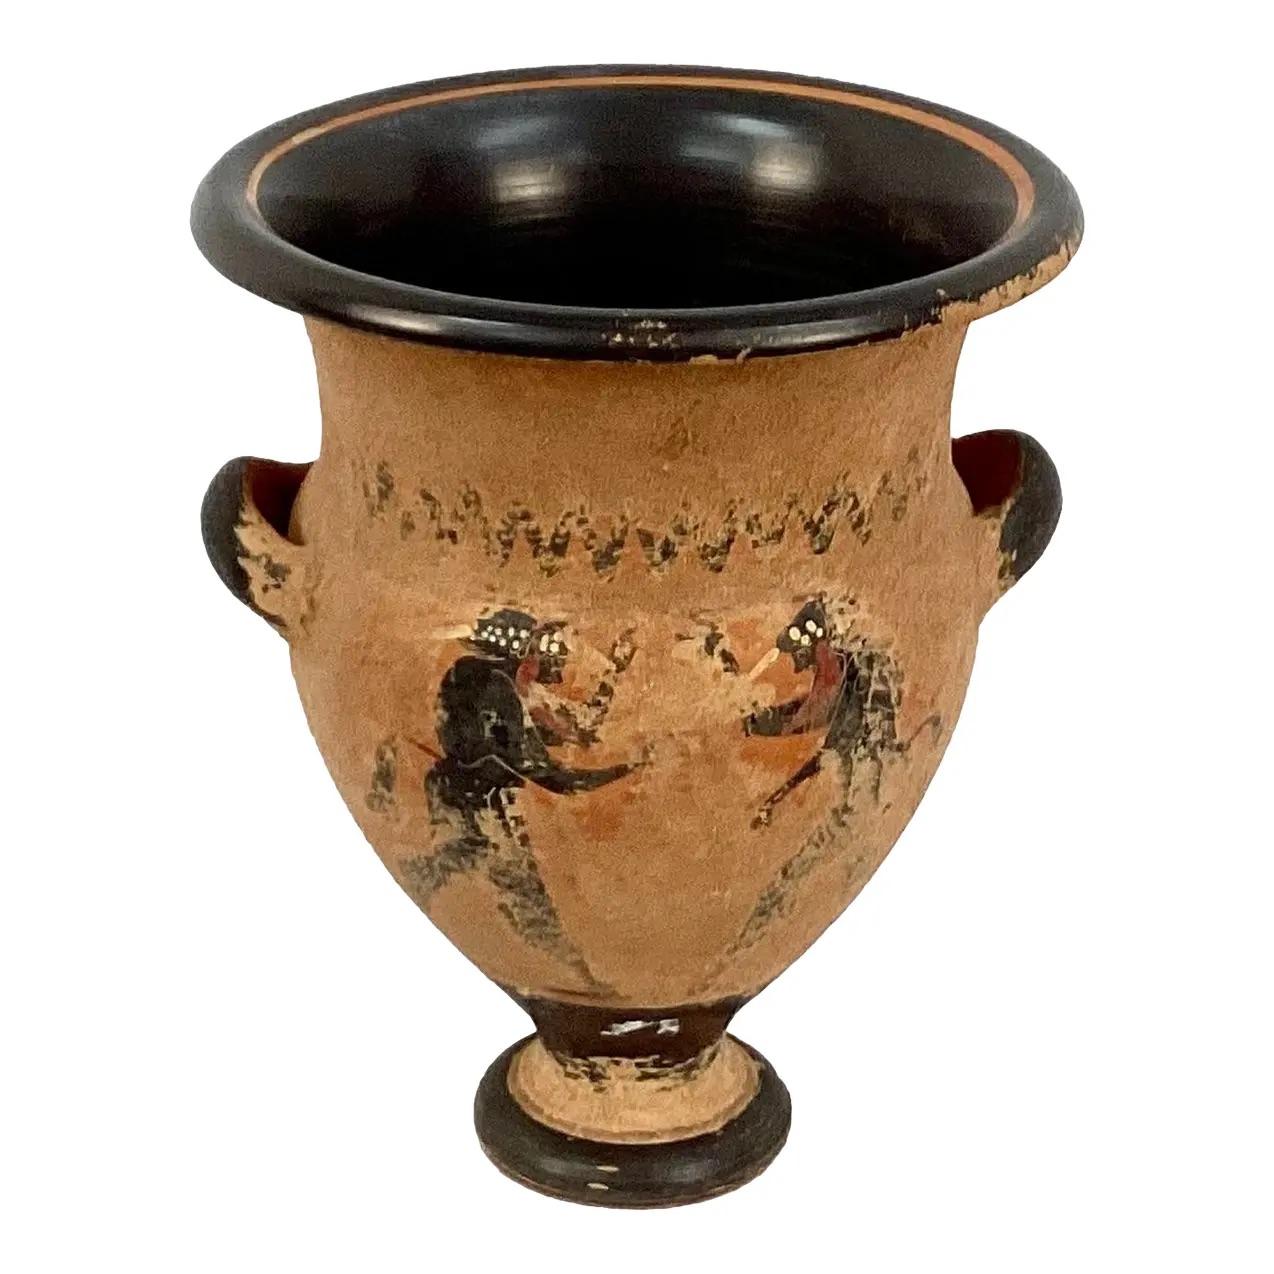 Late 19th Century Grand Tour style terracotta vessel decorated with Grecian figures with Amphora form, two handles on neck. Hand painted. 

Dimensions:
8.5